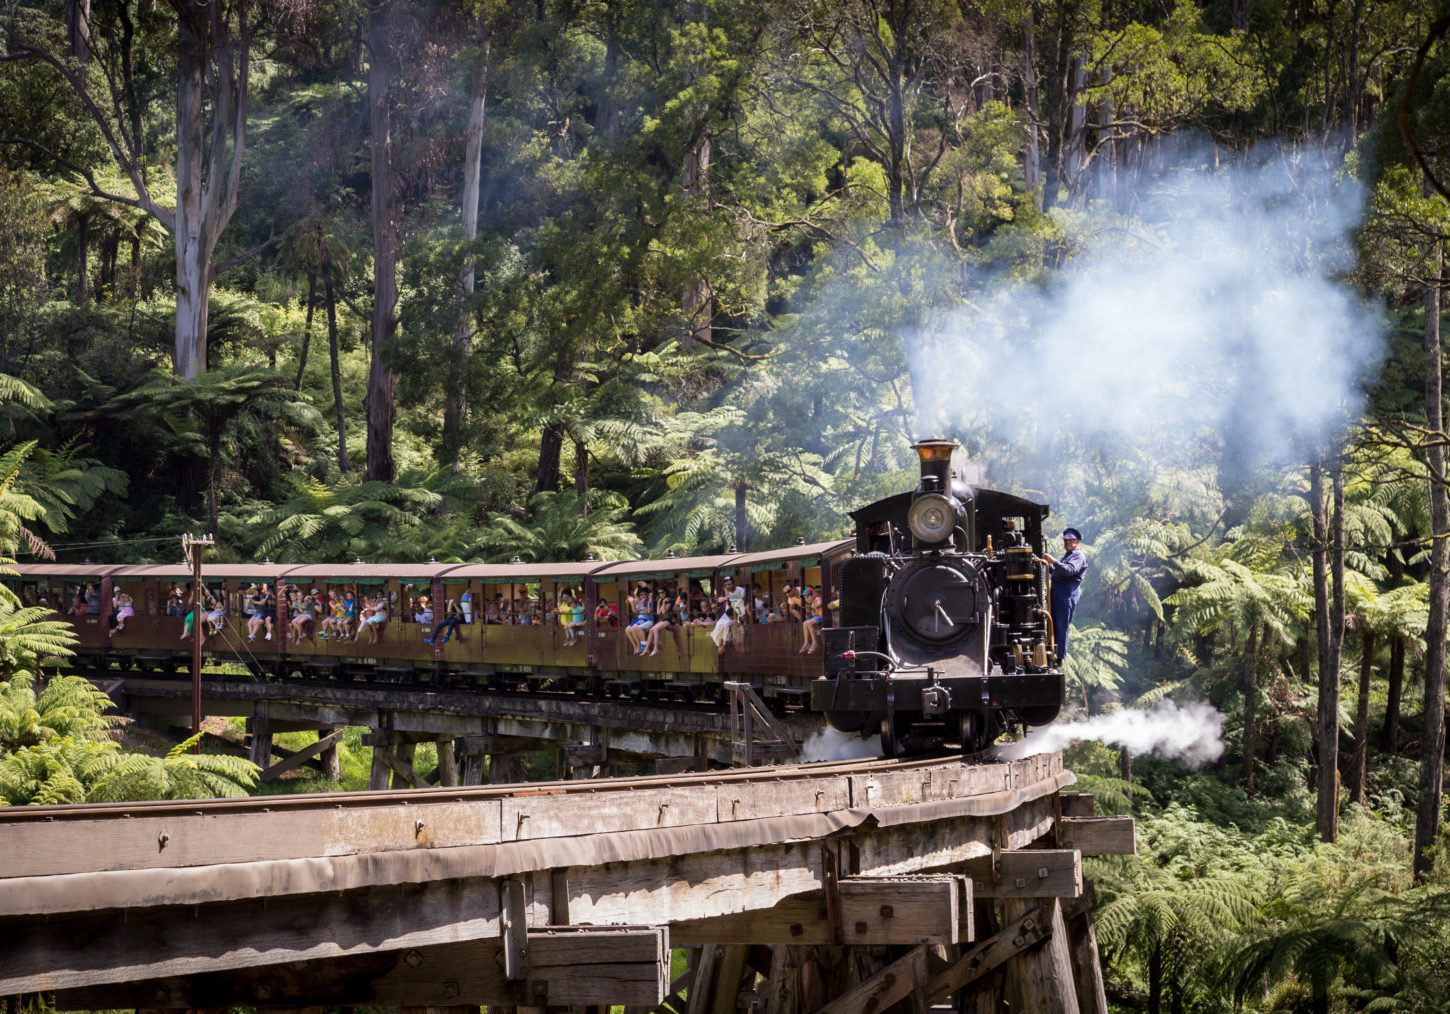 14A thunders across the Monbulk Creek trestle bridge with a train for Gembrook.